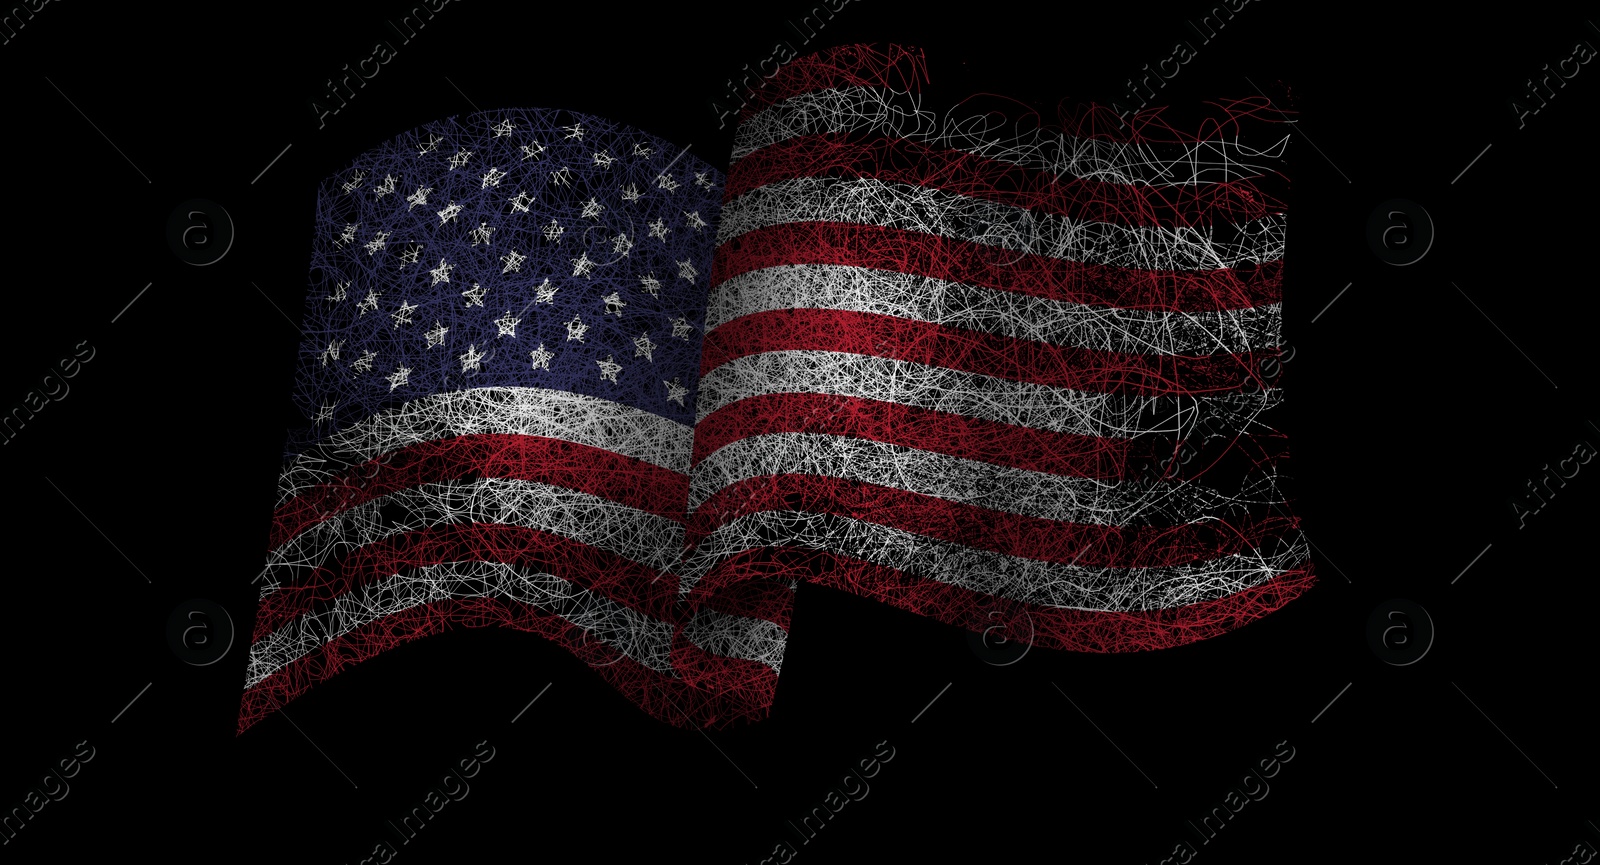 Image of Bright painting of USA national flag on black background